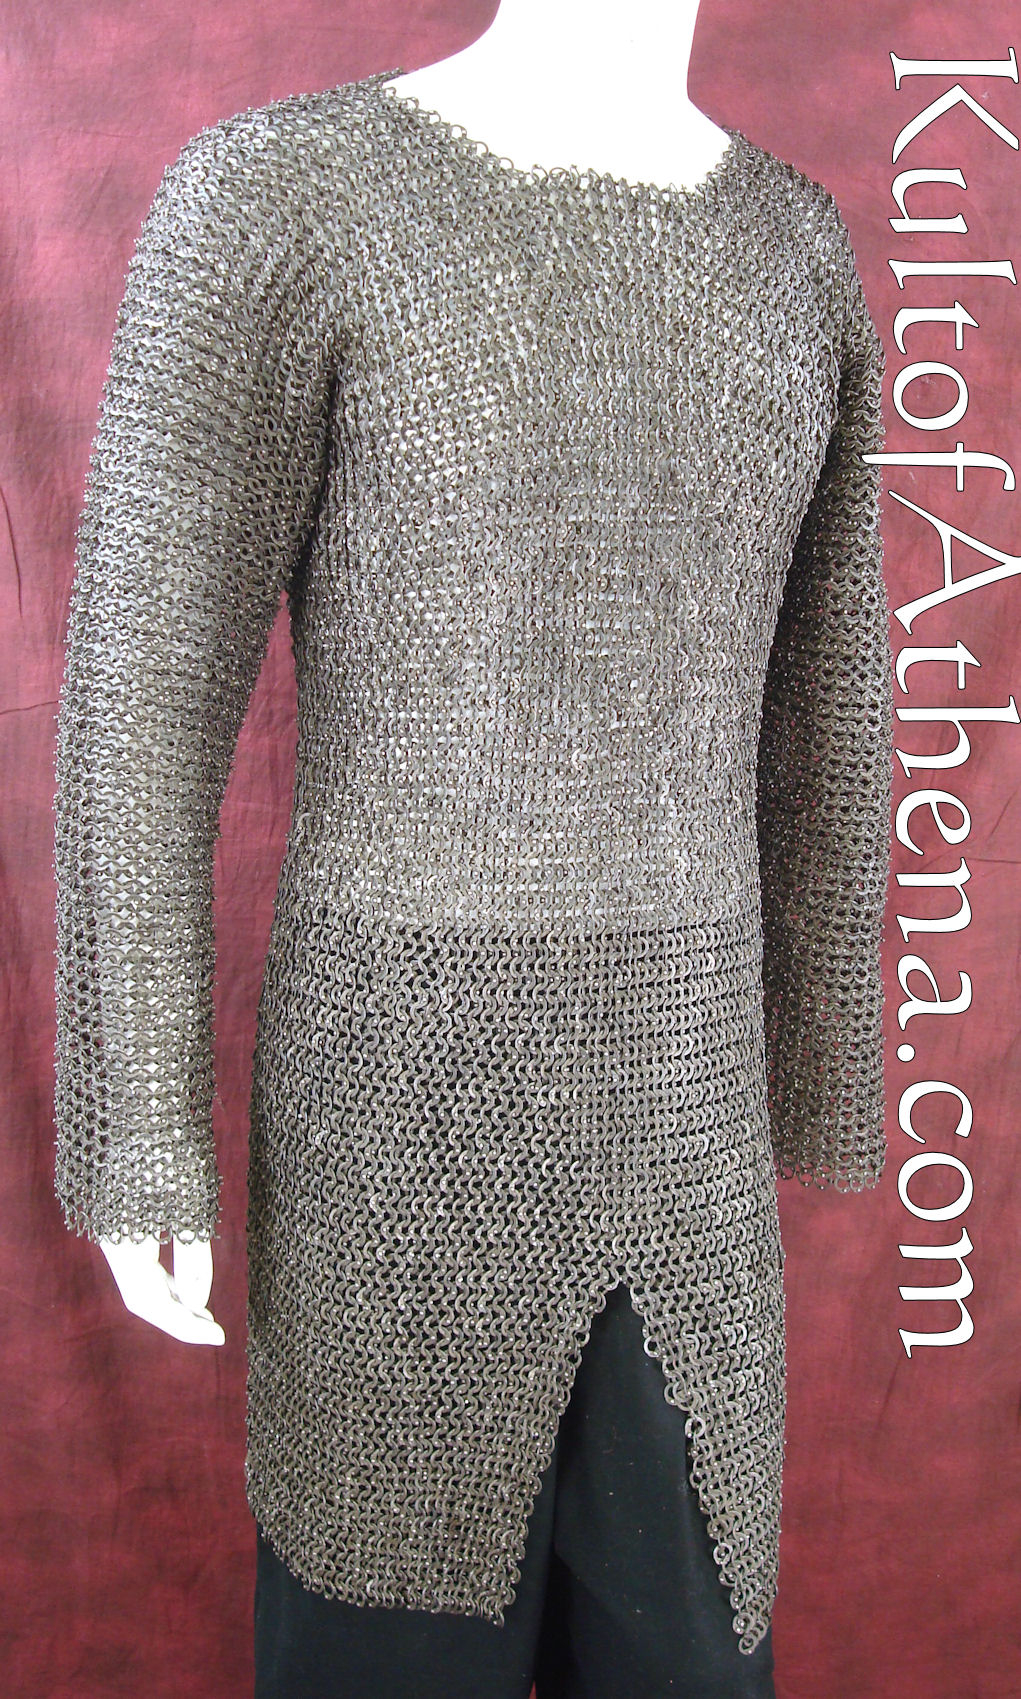 Chainmail Crochet Pattern Snc275n Dfds Chainmail Hauberk Dome Riveted Construction